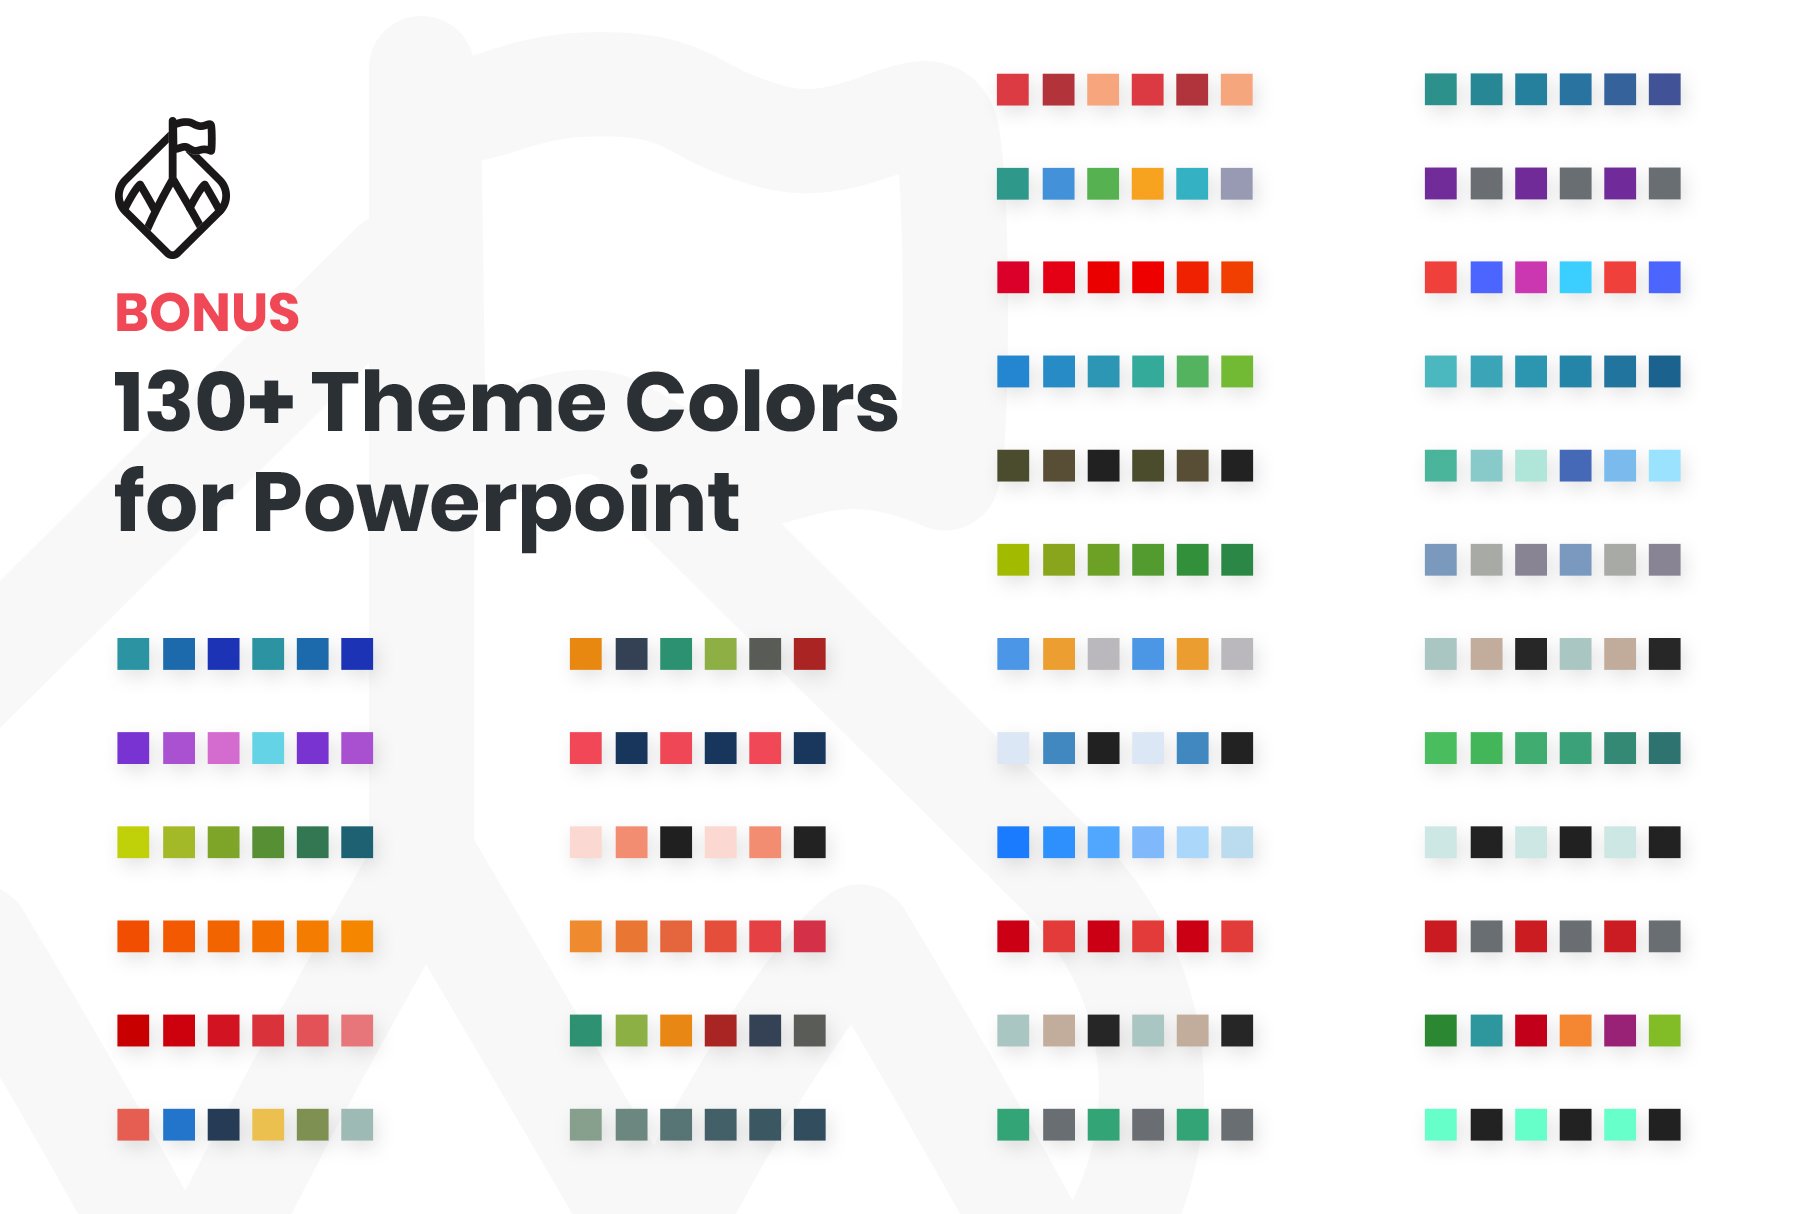 Real Estate for PowerPoint includes 130 color themes for powerpoint.